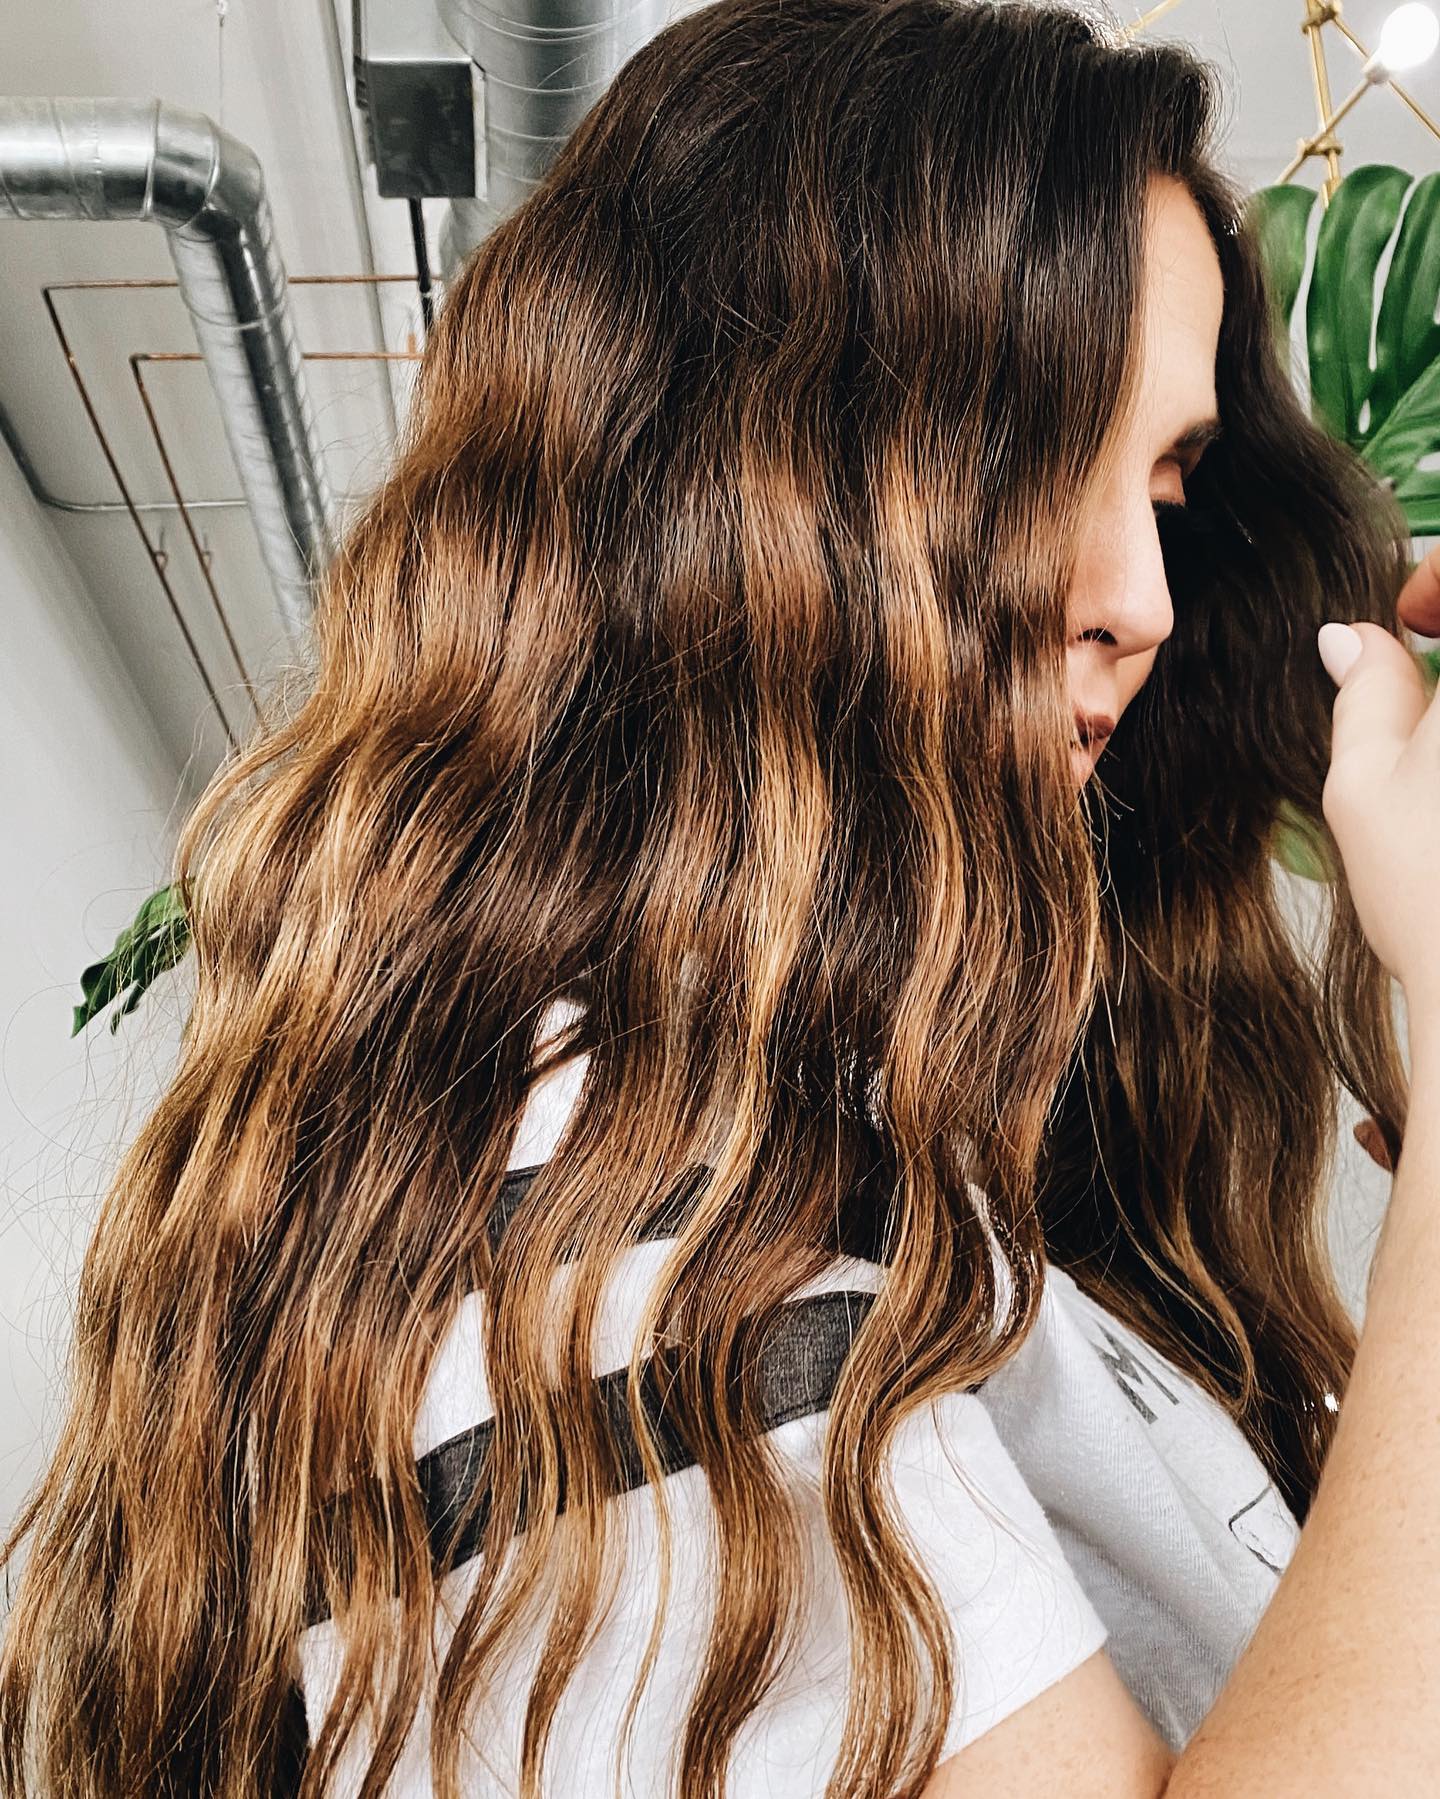 S U M M E R GIVEAWAY! Score the perfect waving wand that brings all the beachy hair dreams to life